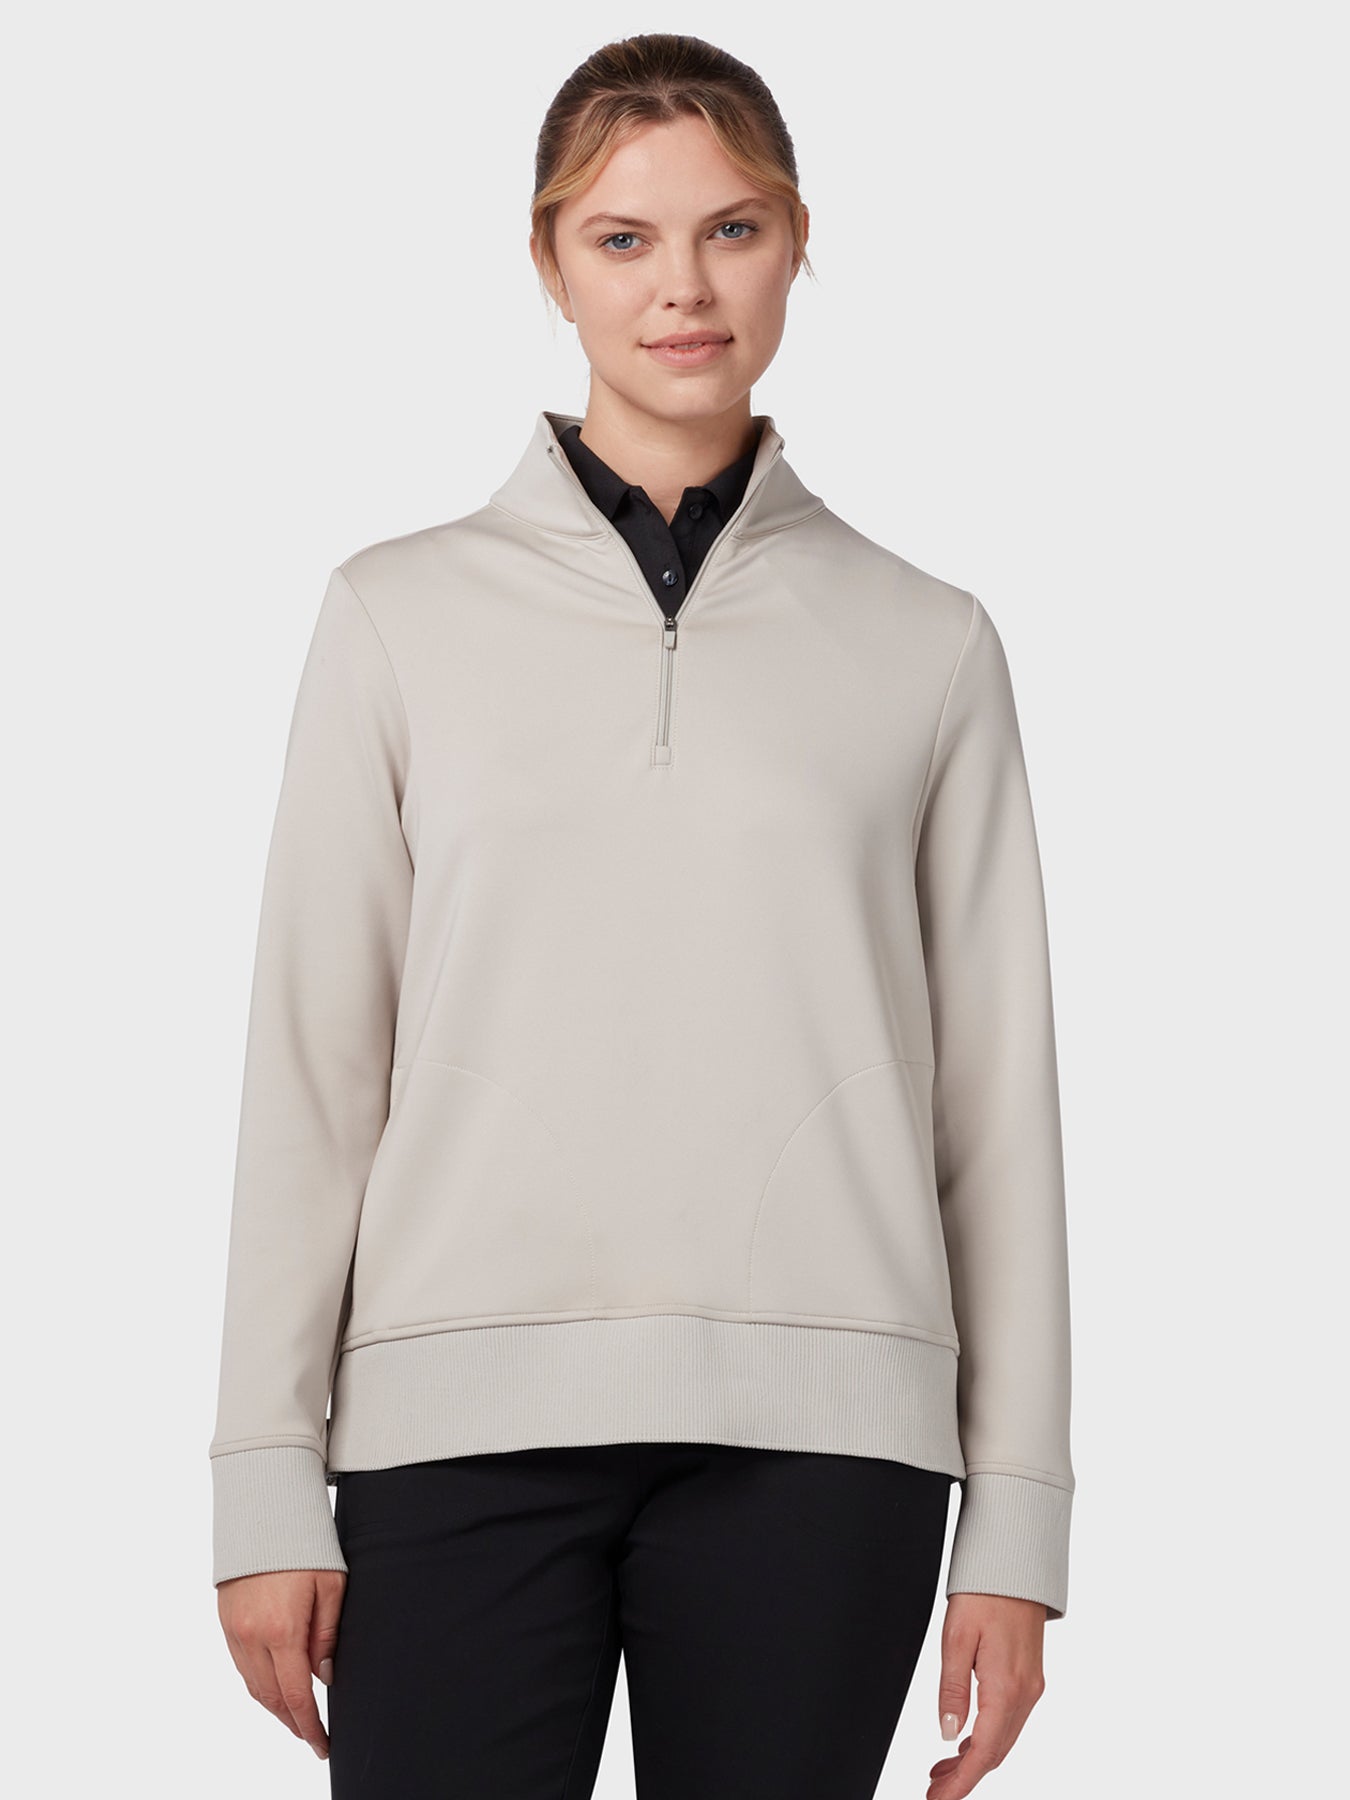 View Midweight Womens Fleece Crossover In Chateau Grey Chateau Grey XL information